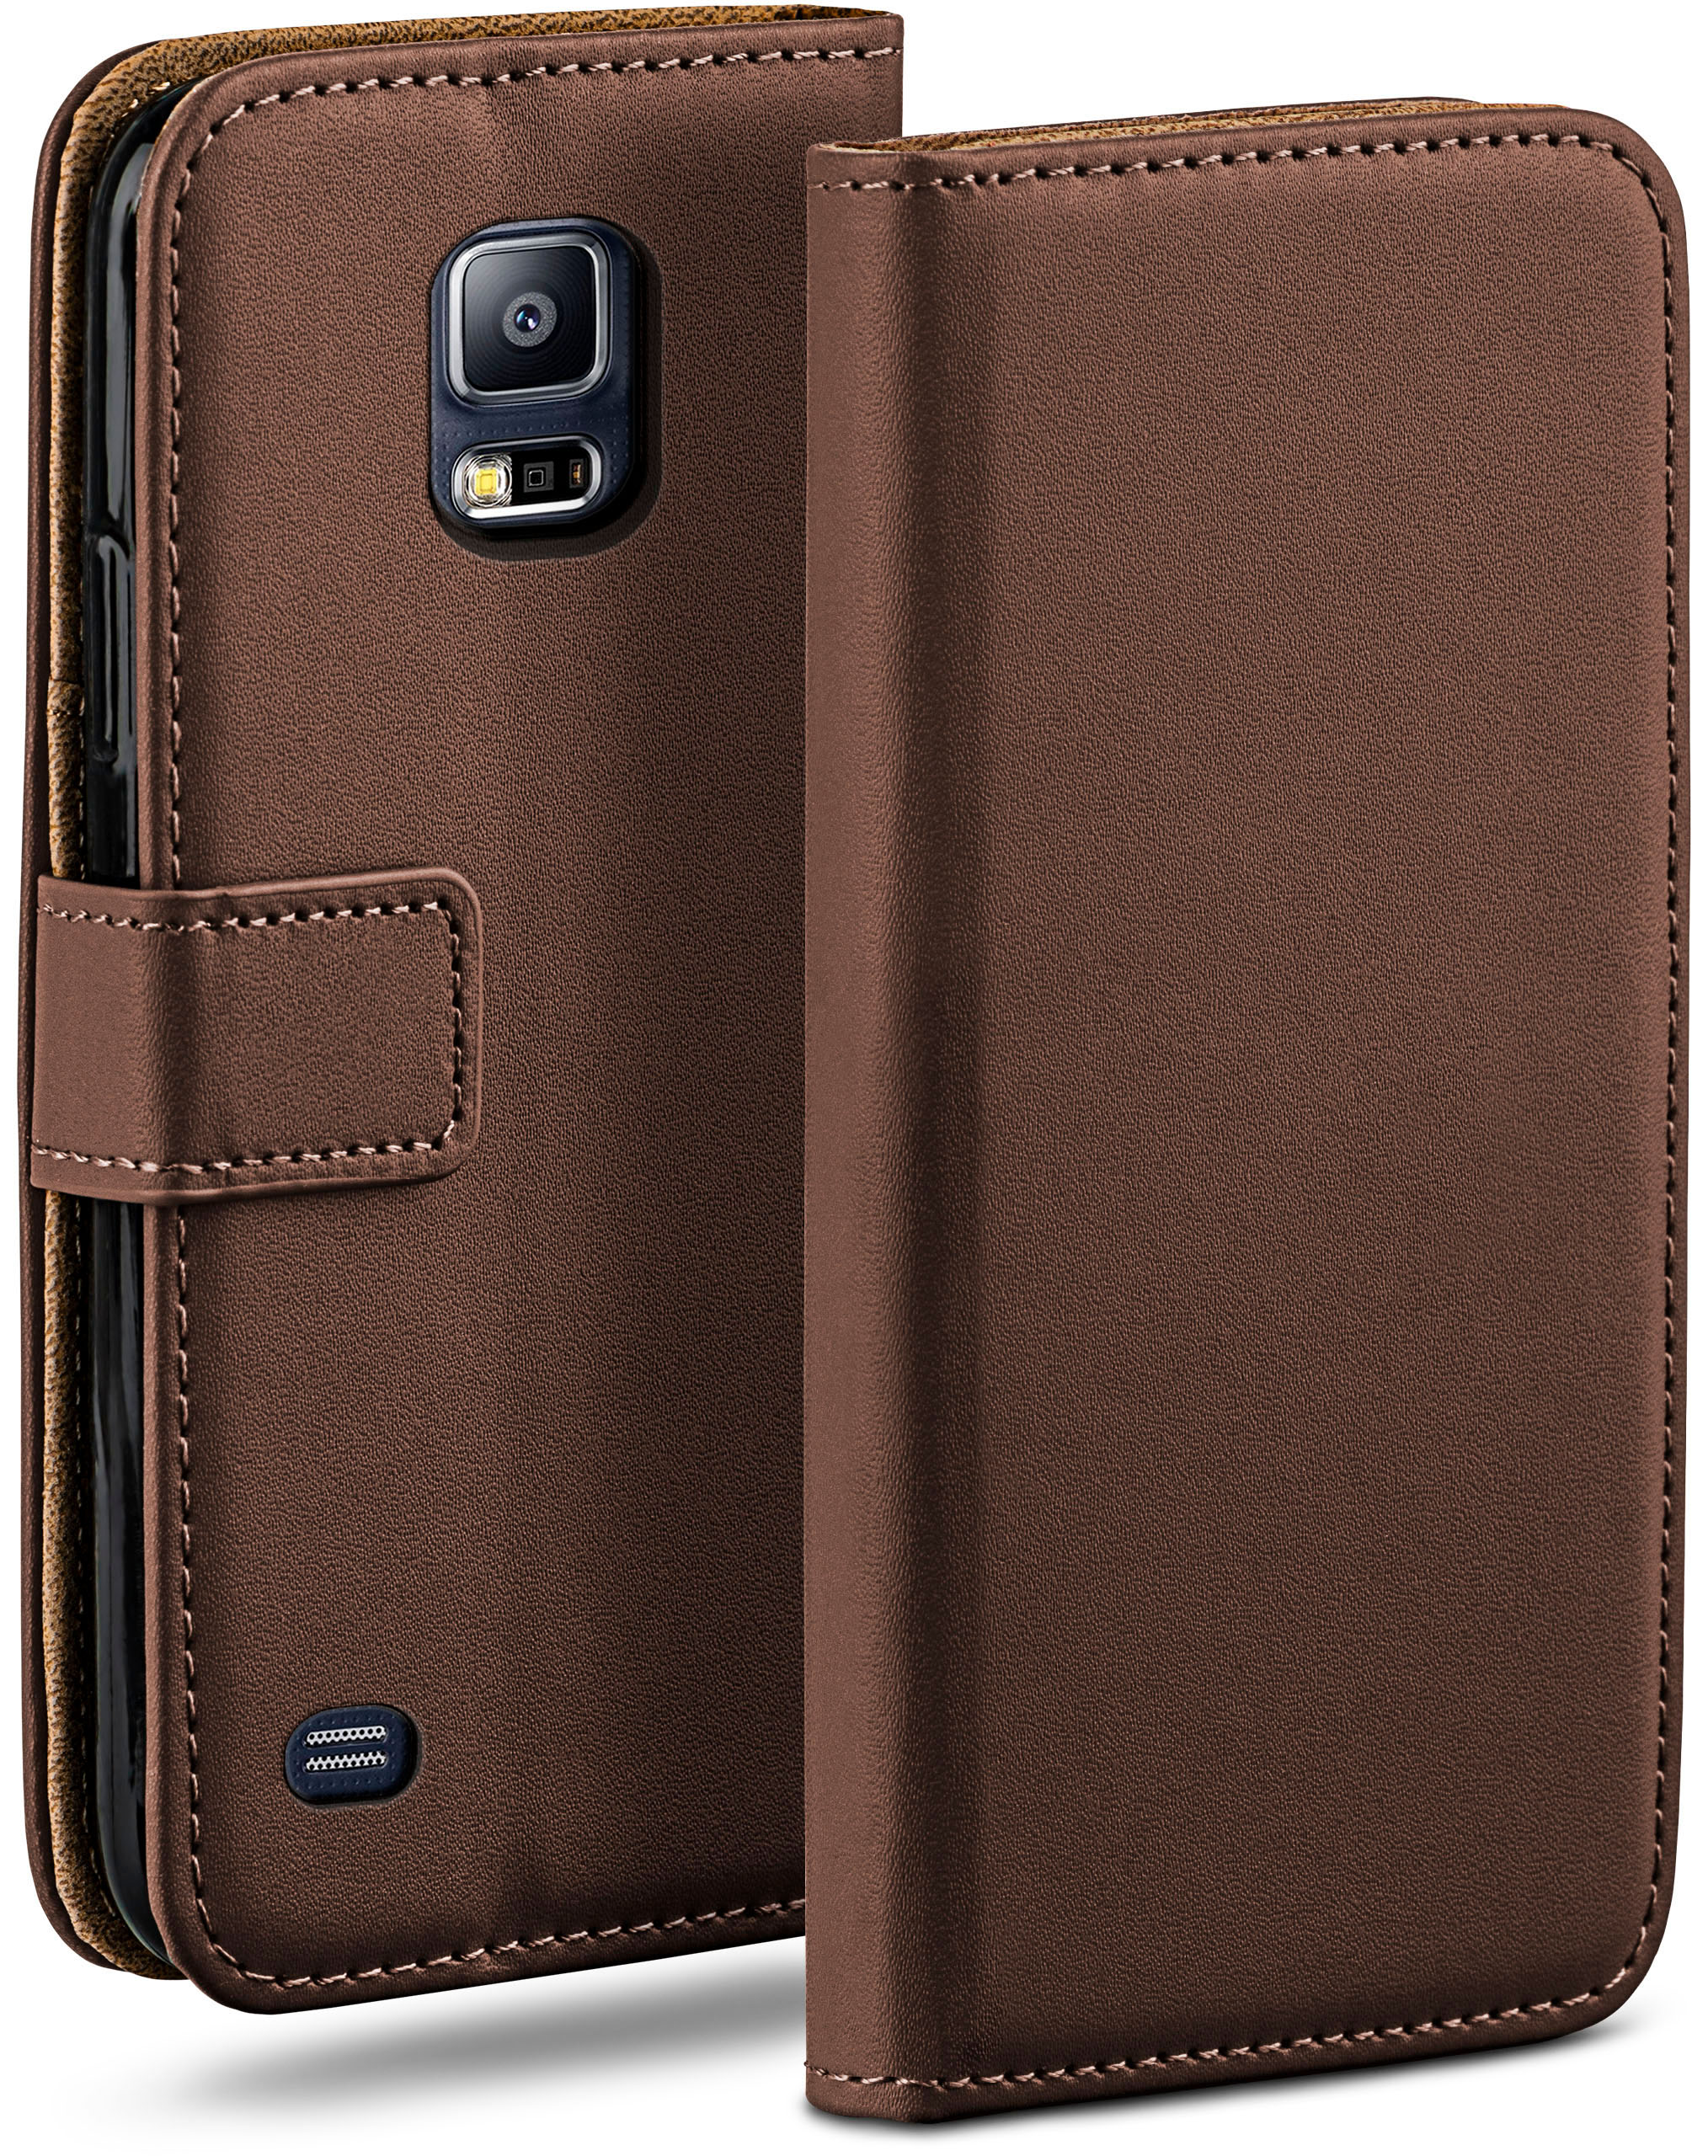 MOEX Oxide-Brown S5 Neo, Samsung, / Galaxy Book Case, S5 Bookcover,